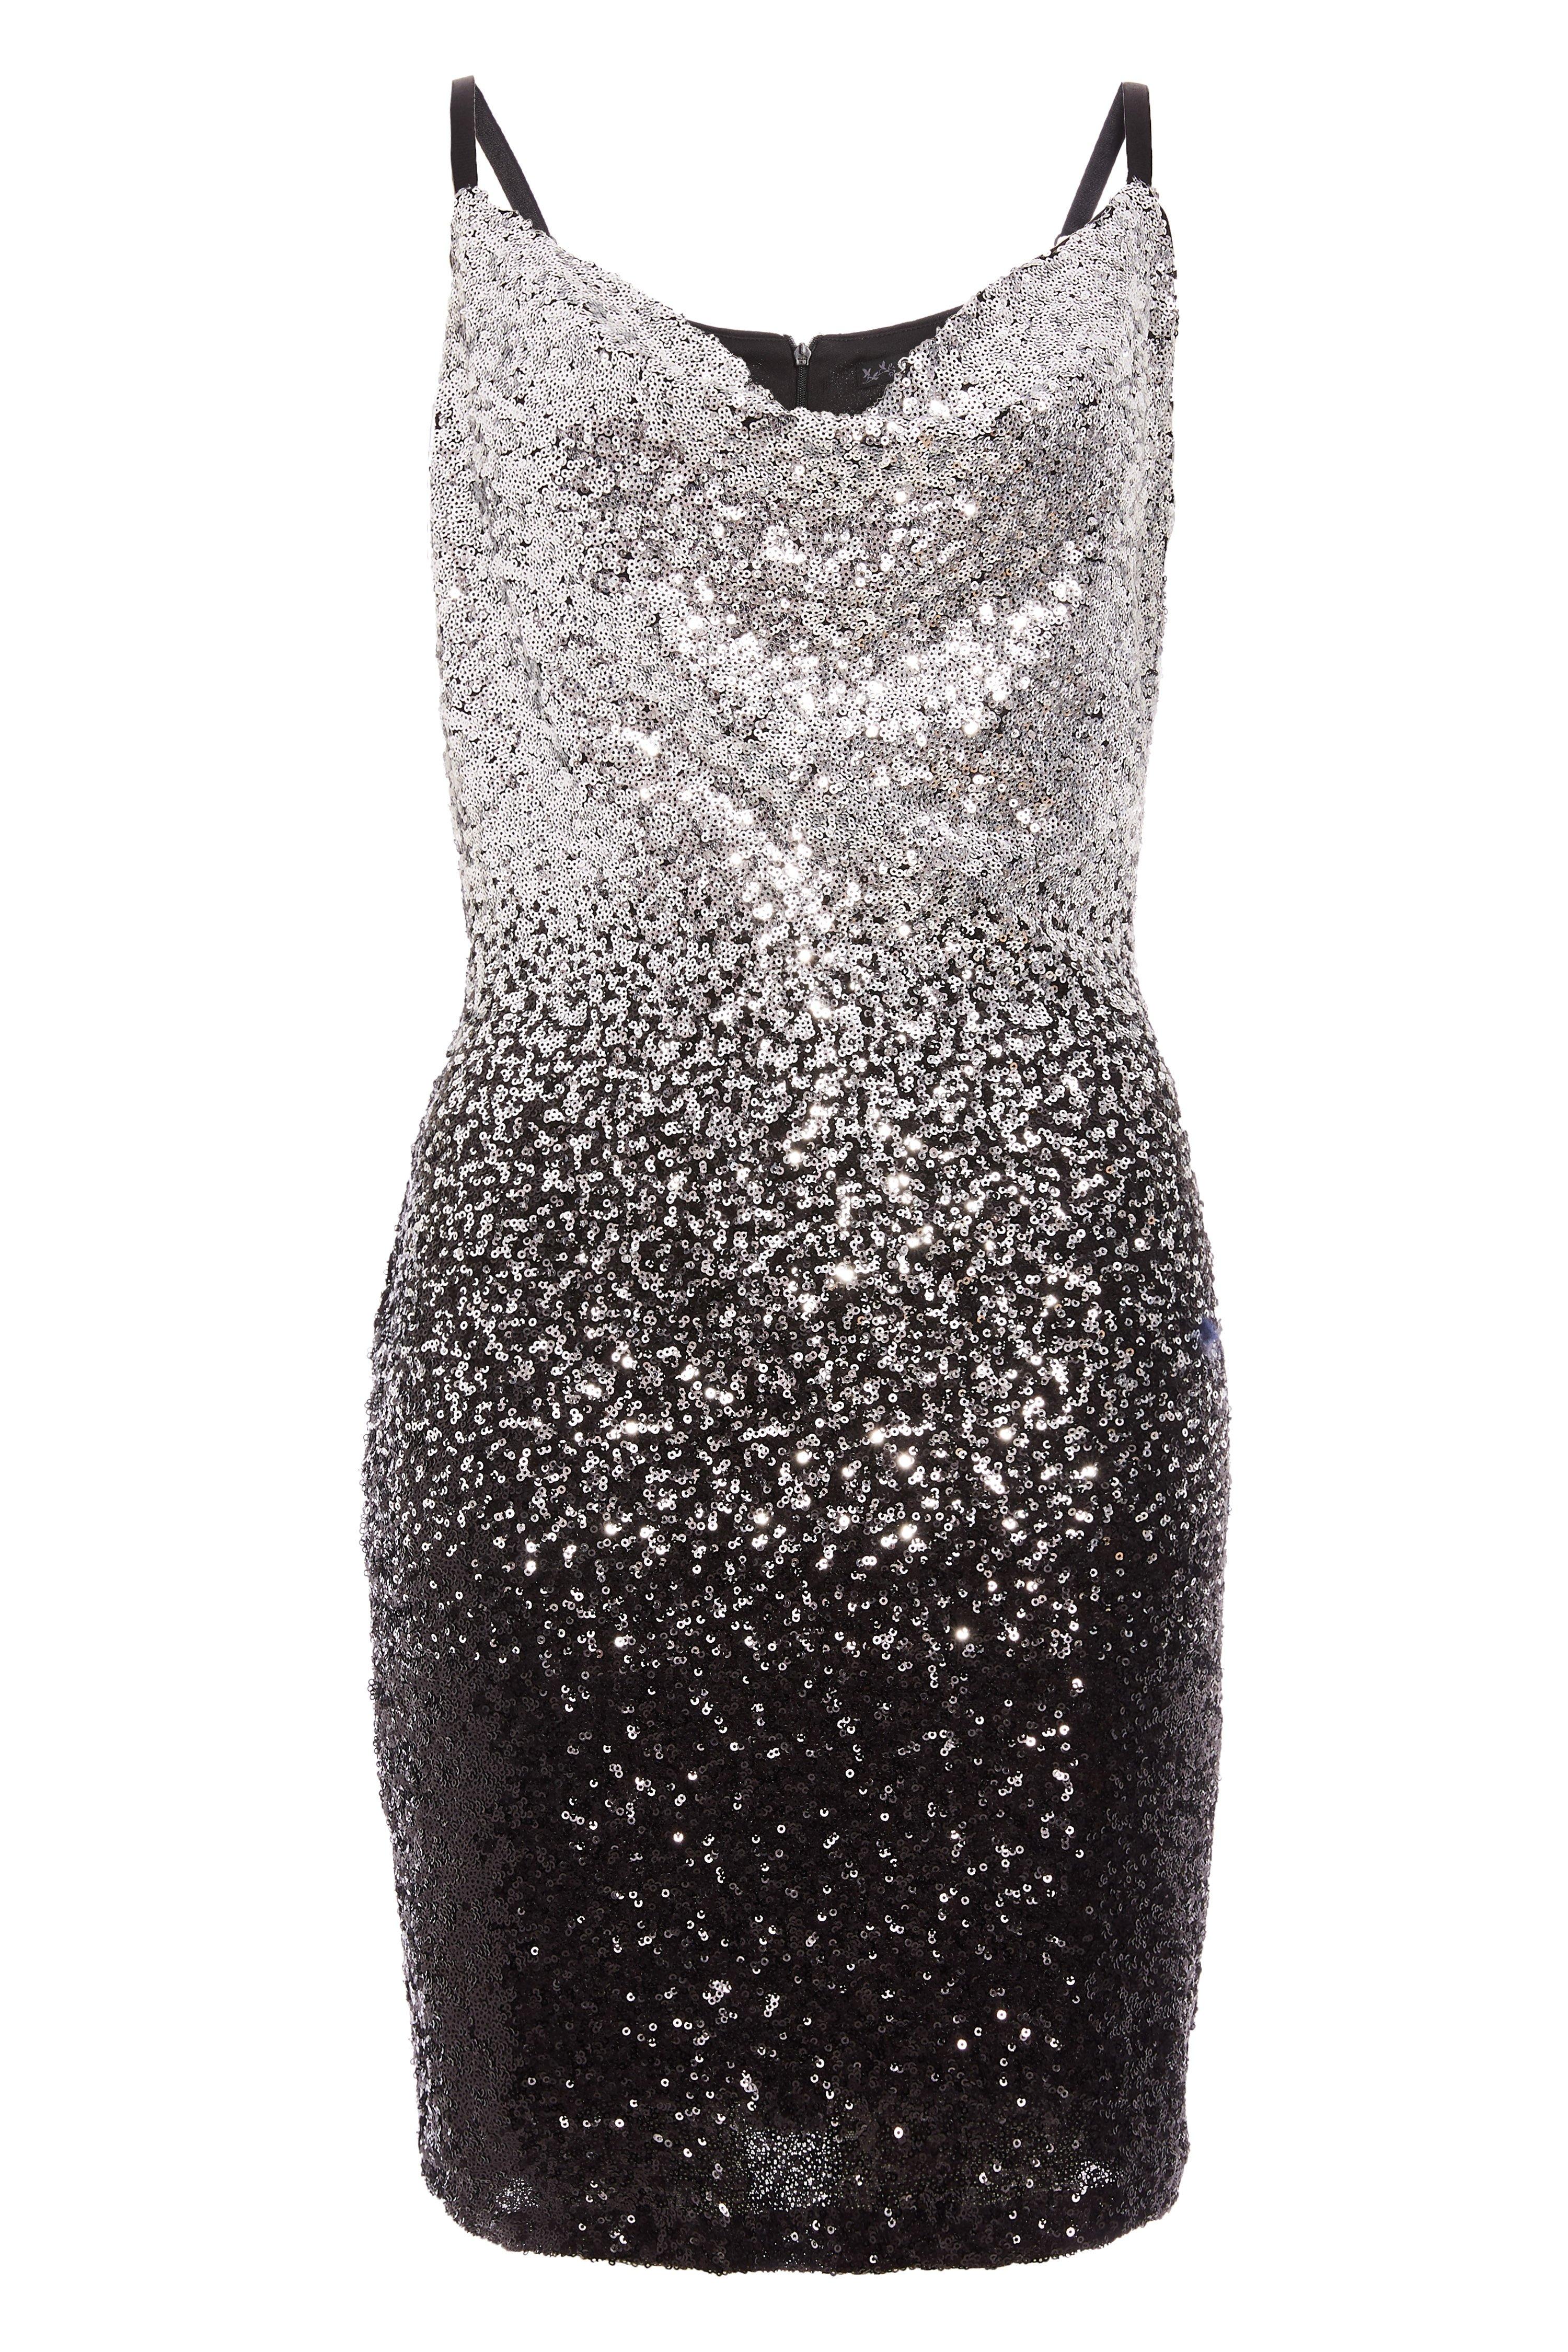 Black and Silver Ombre Sequin Cowl Neck Dress - Quiz Clothing